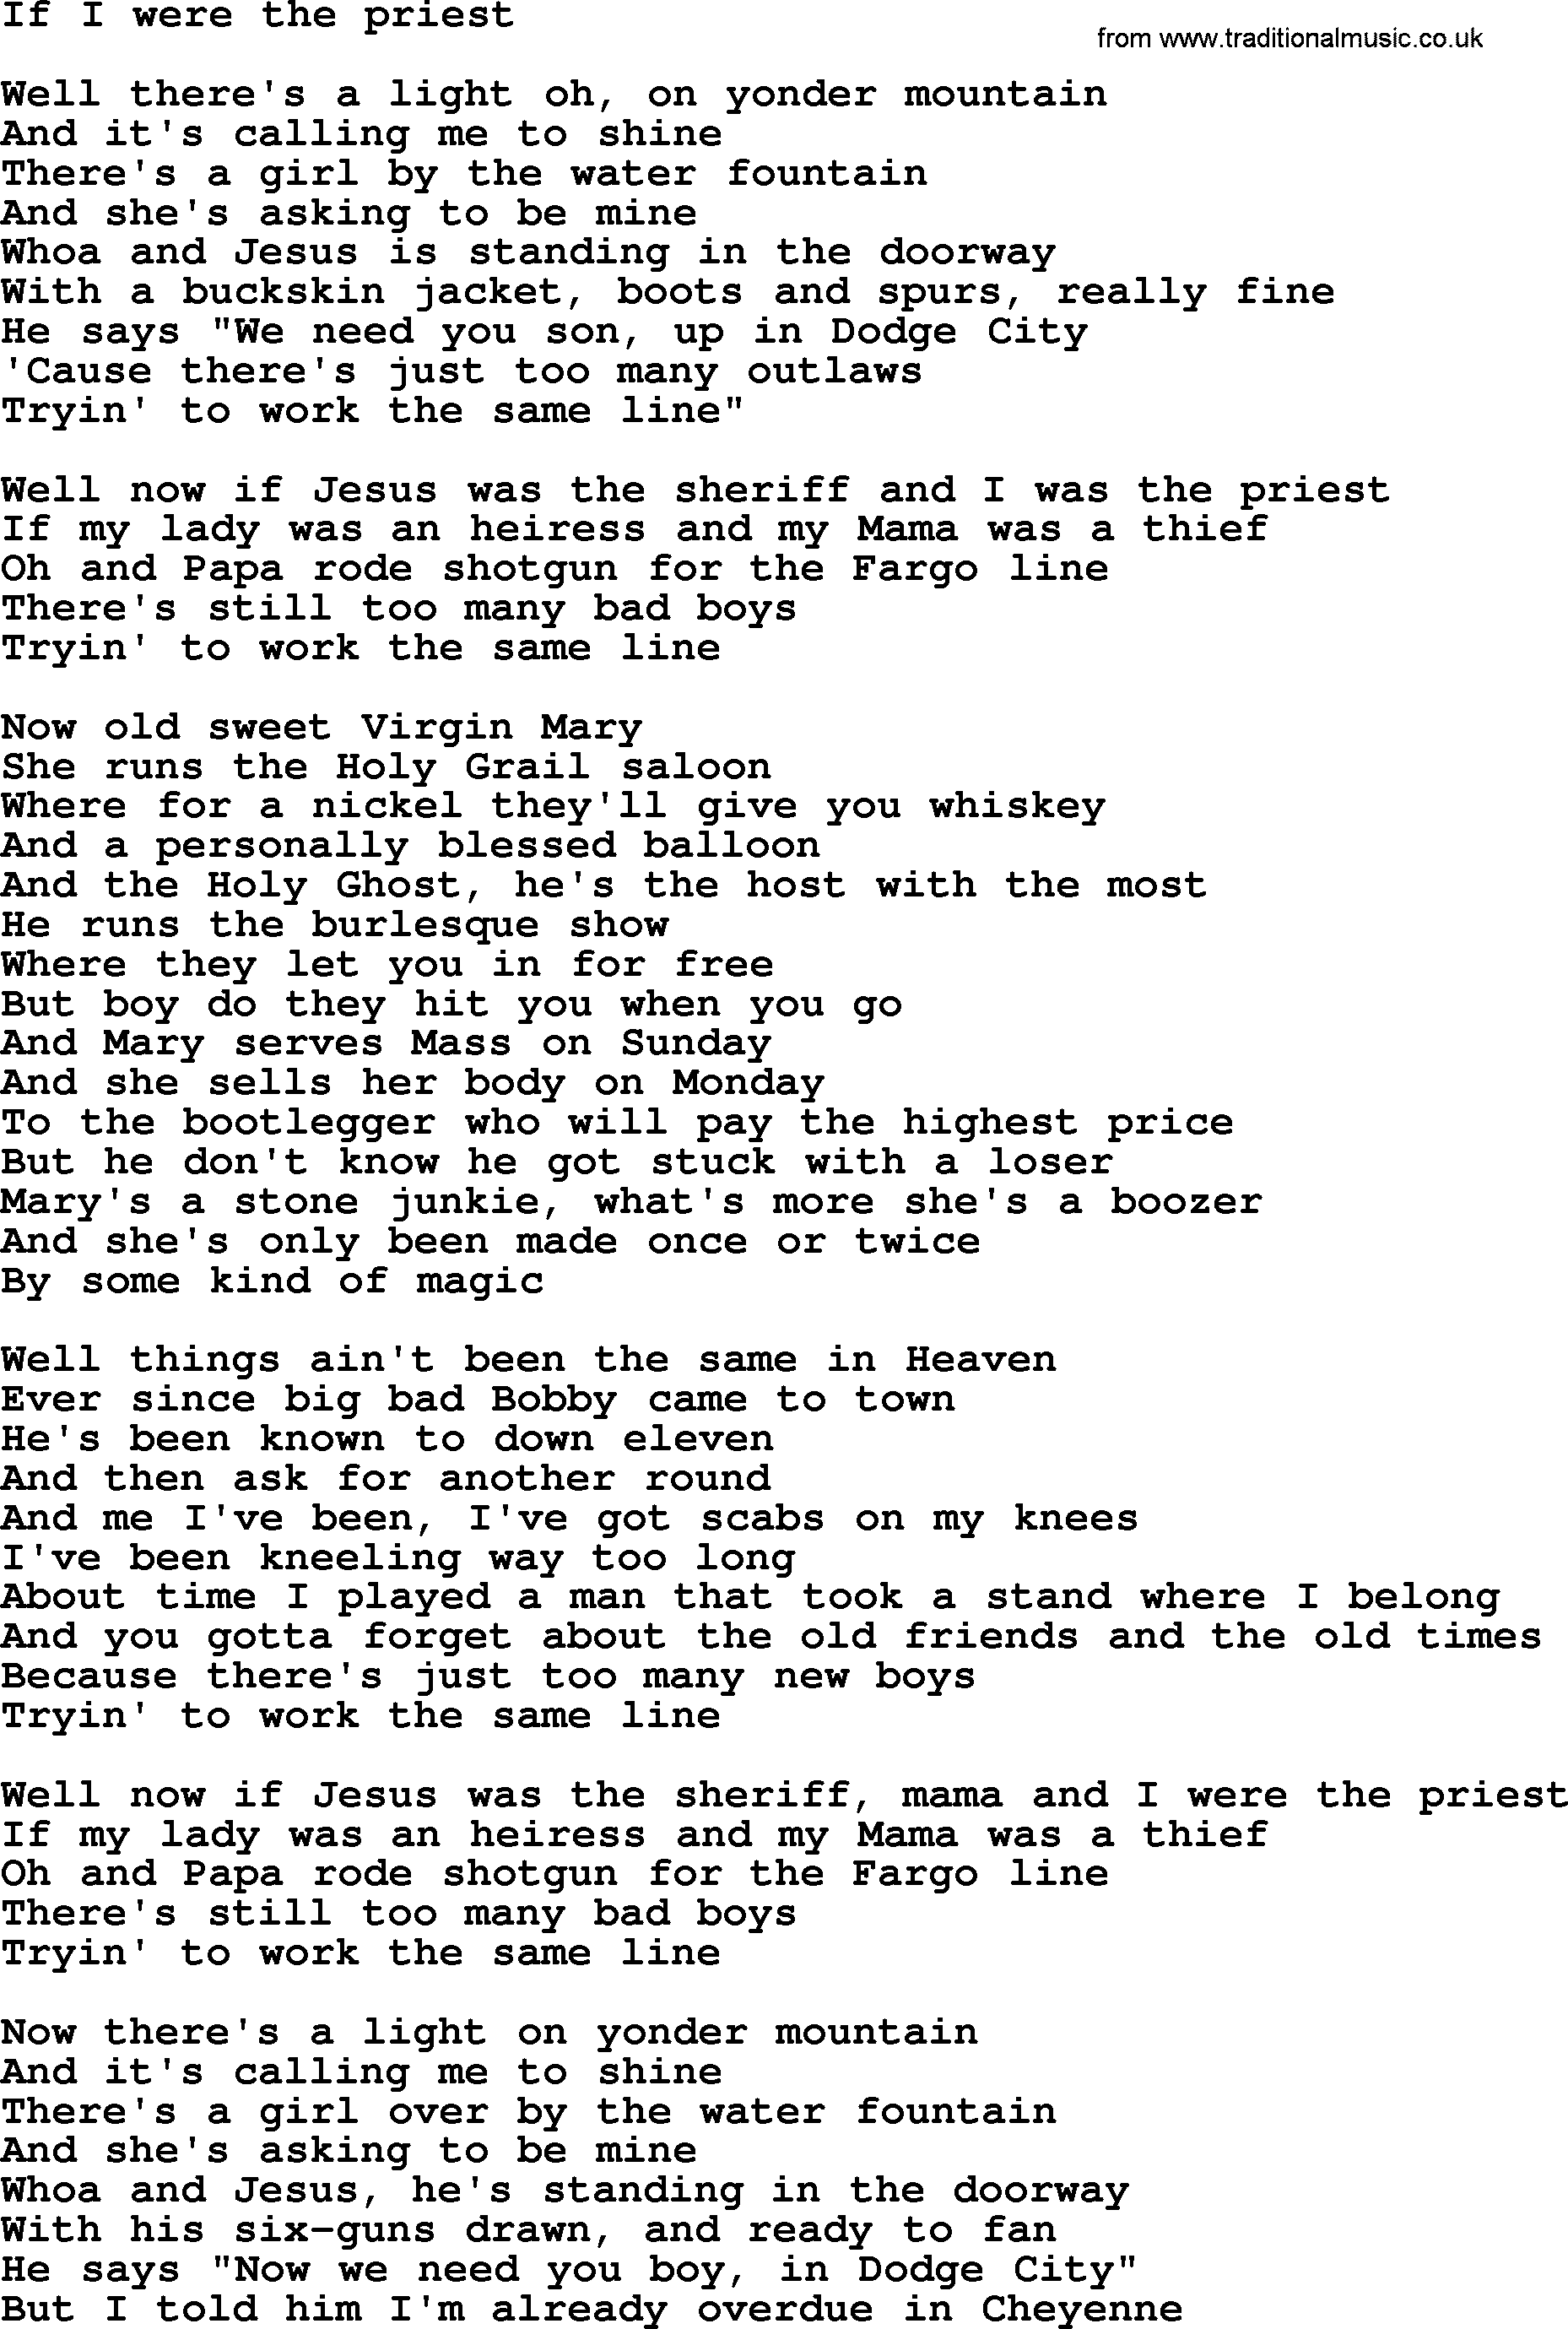 Bruce Springsteen song: If I Were The Priest lyrics